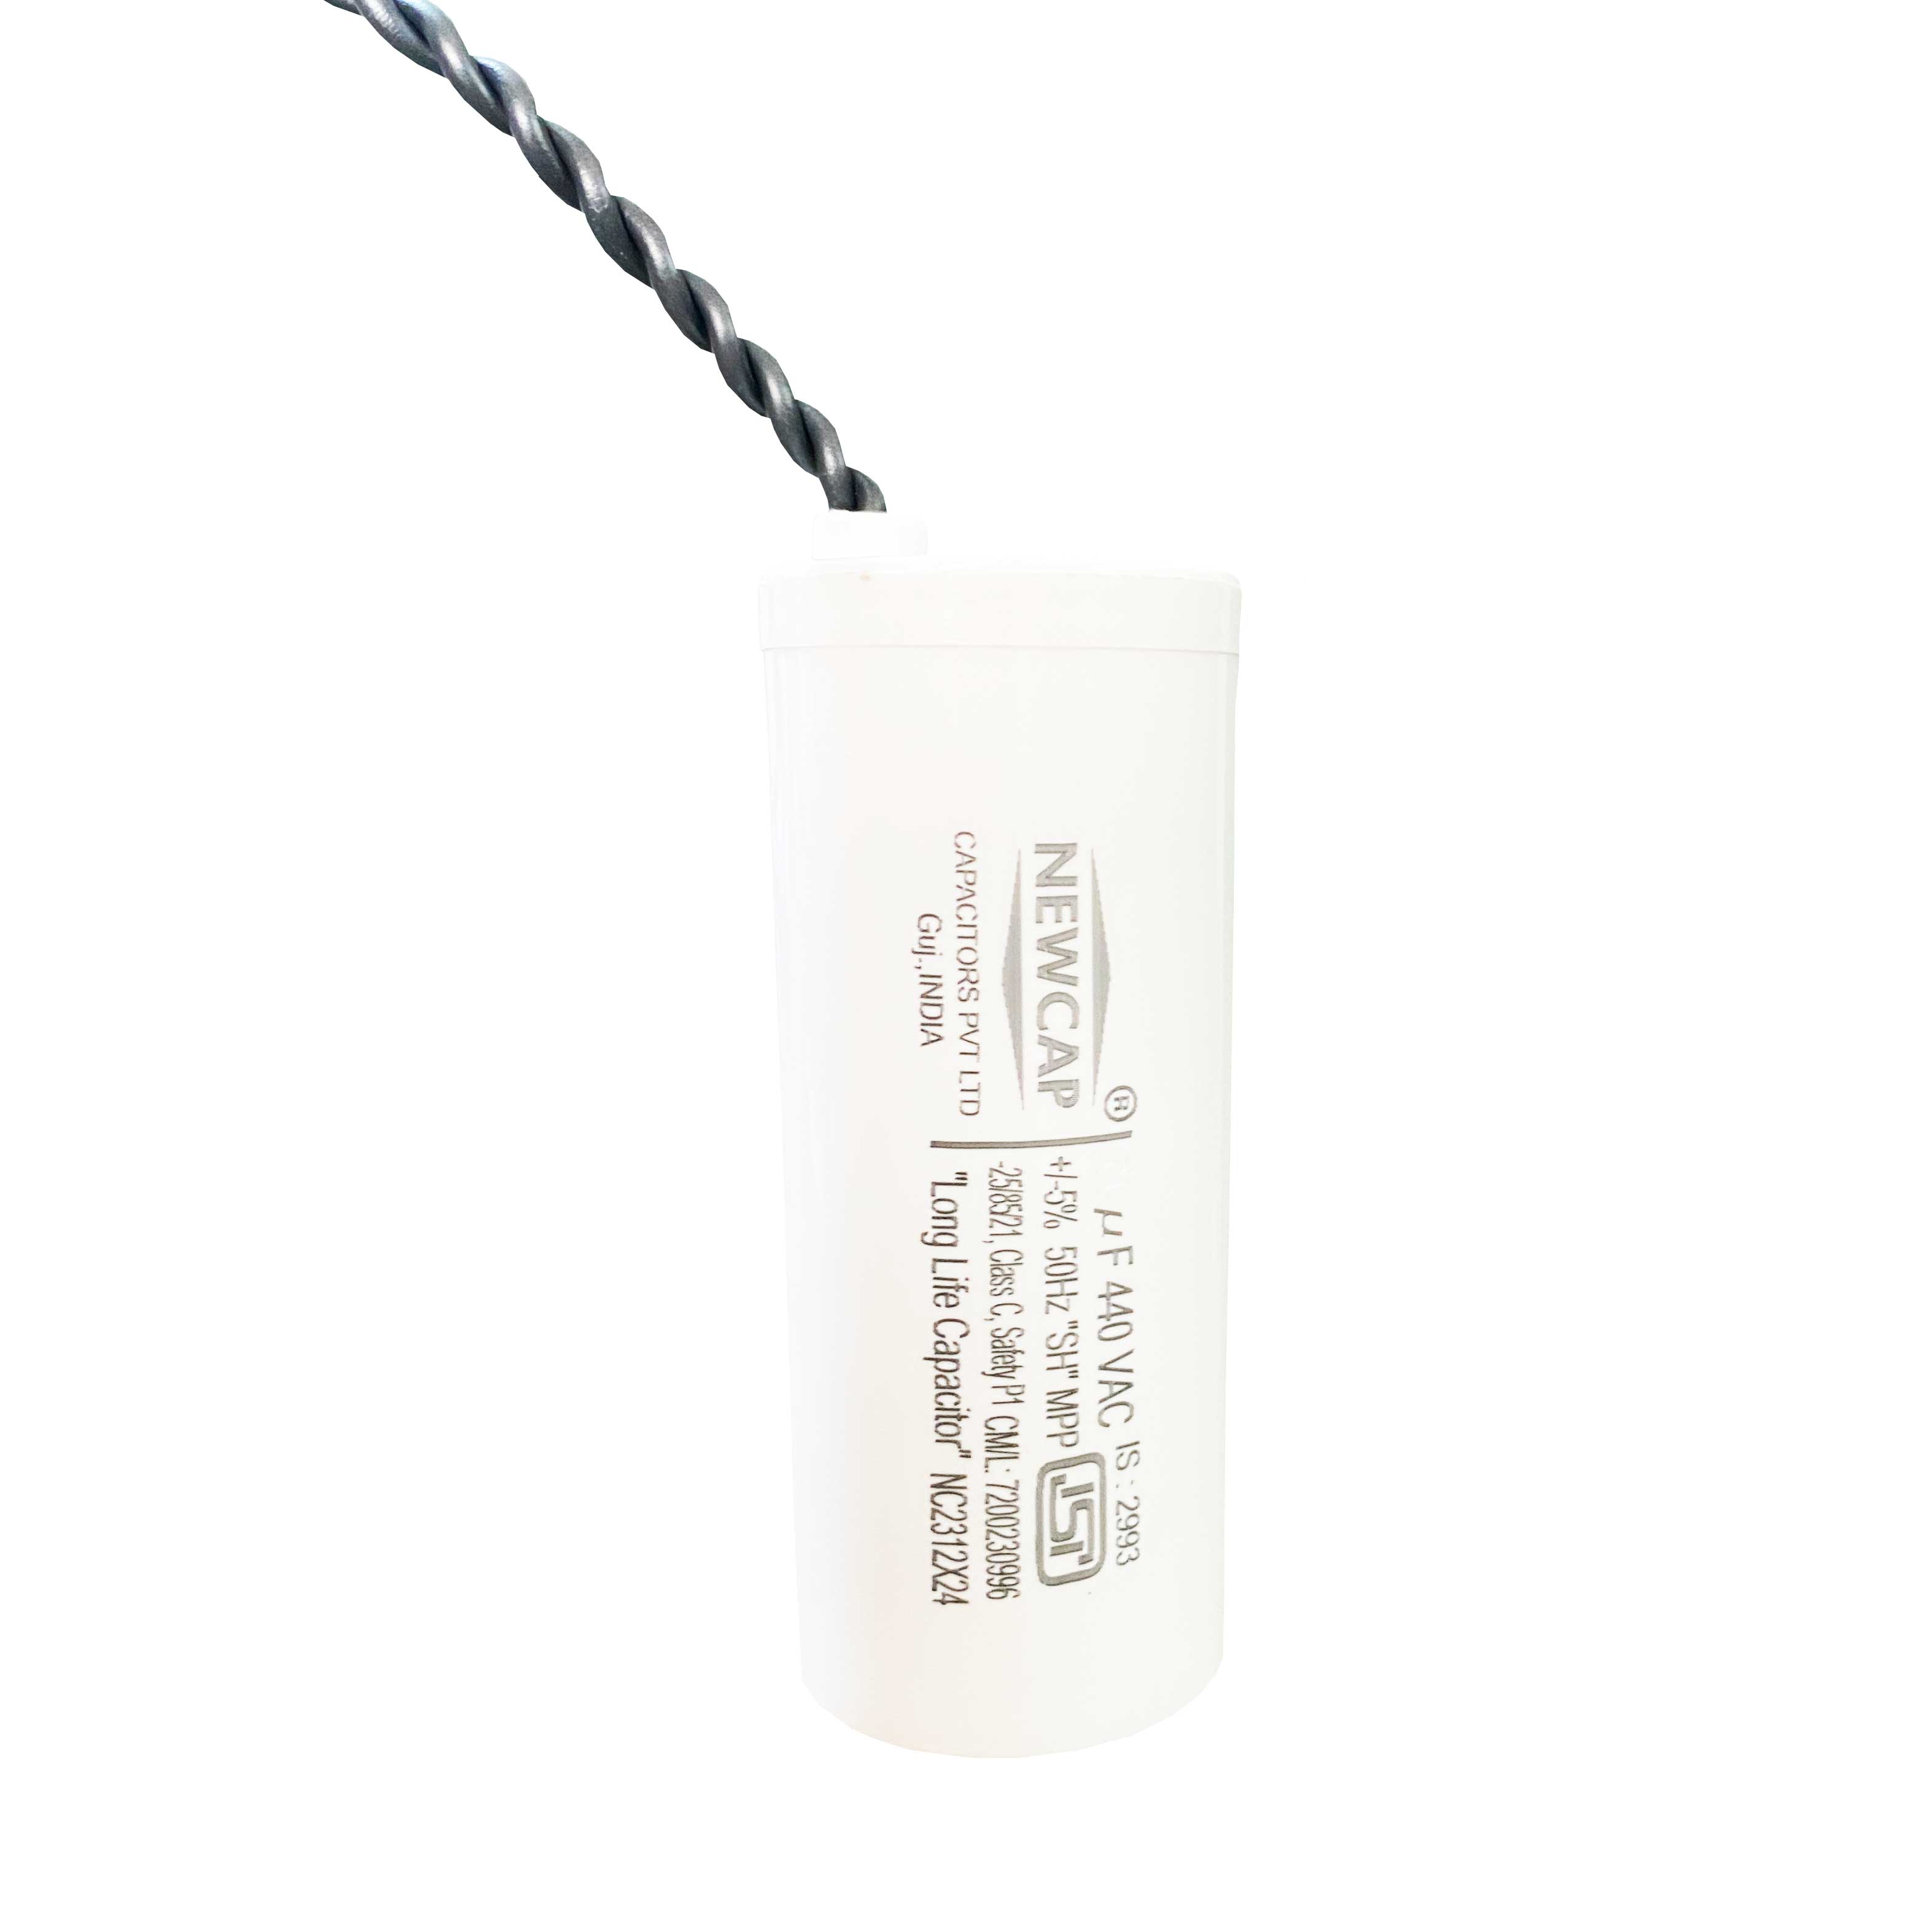 25 MFD Run Capacitor suitable for any motor 230 VAC